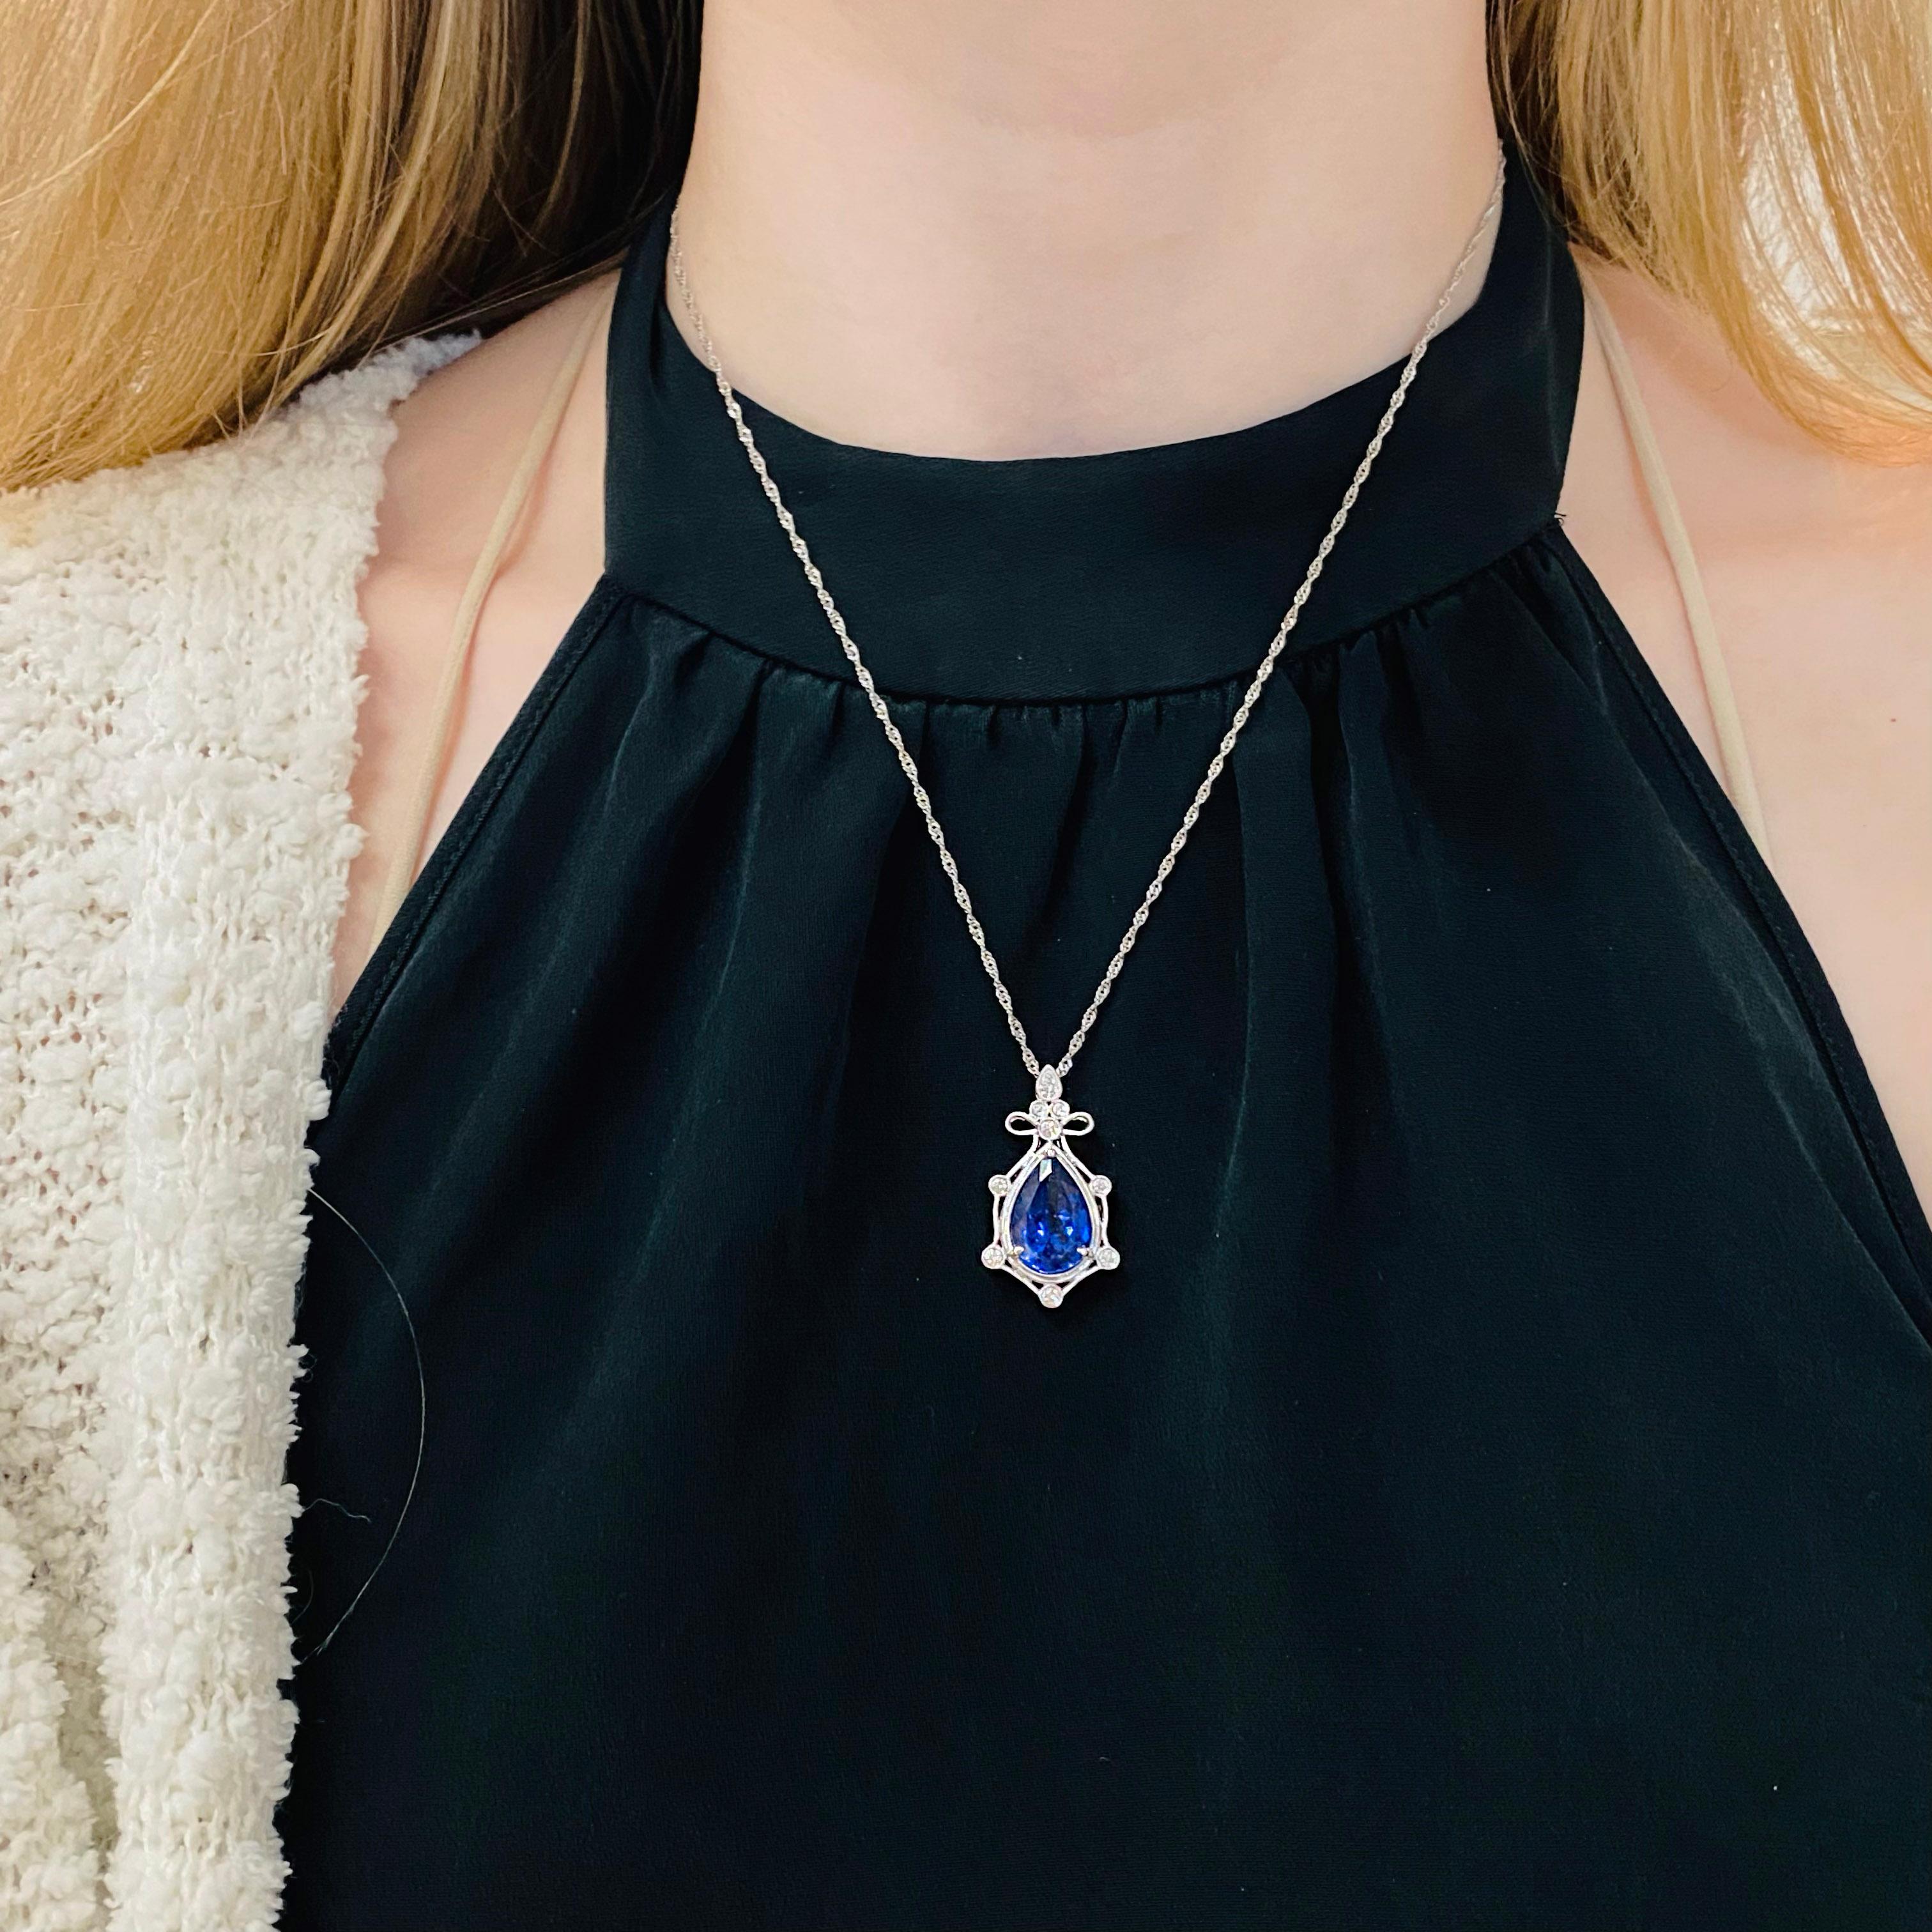 This custom design is one of the many created at Five Star Jewelry Brokers and Gemologist. The deep blue color of the tanzanite is so eye-catching and pairs perfectly with the diamonds and white gold surrounding it. Tanzanite is a very rare gemstone